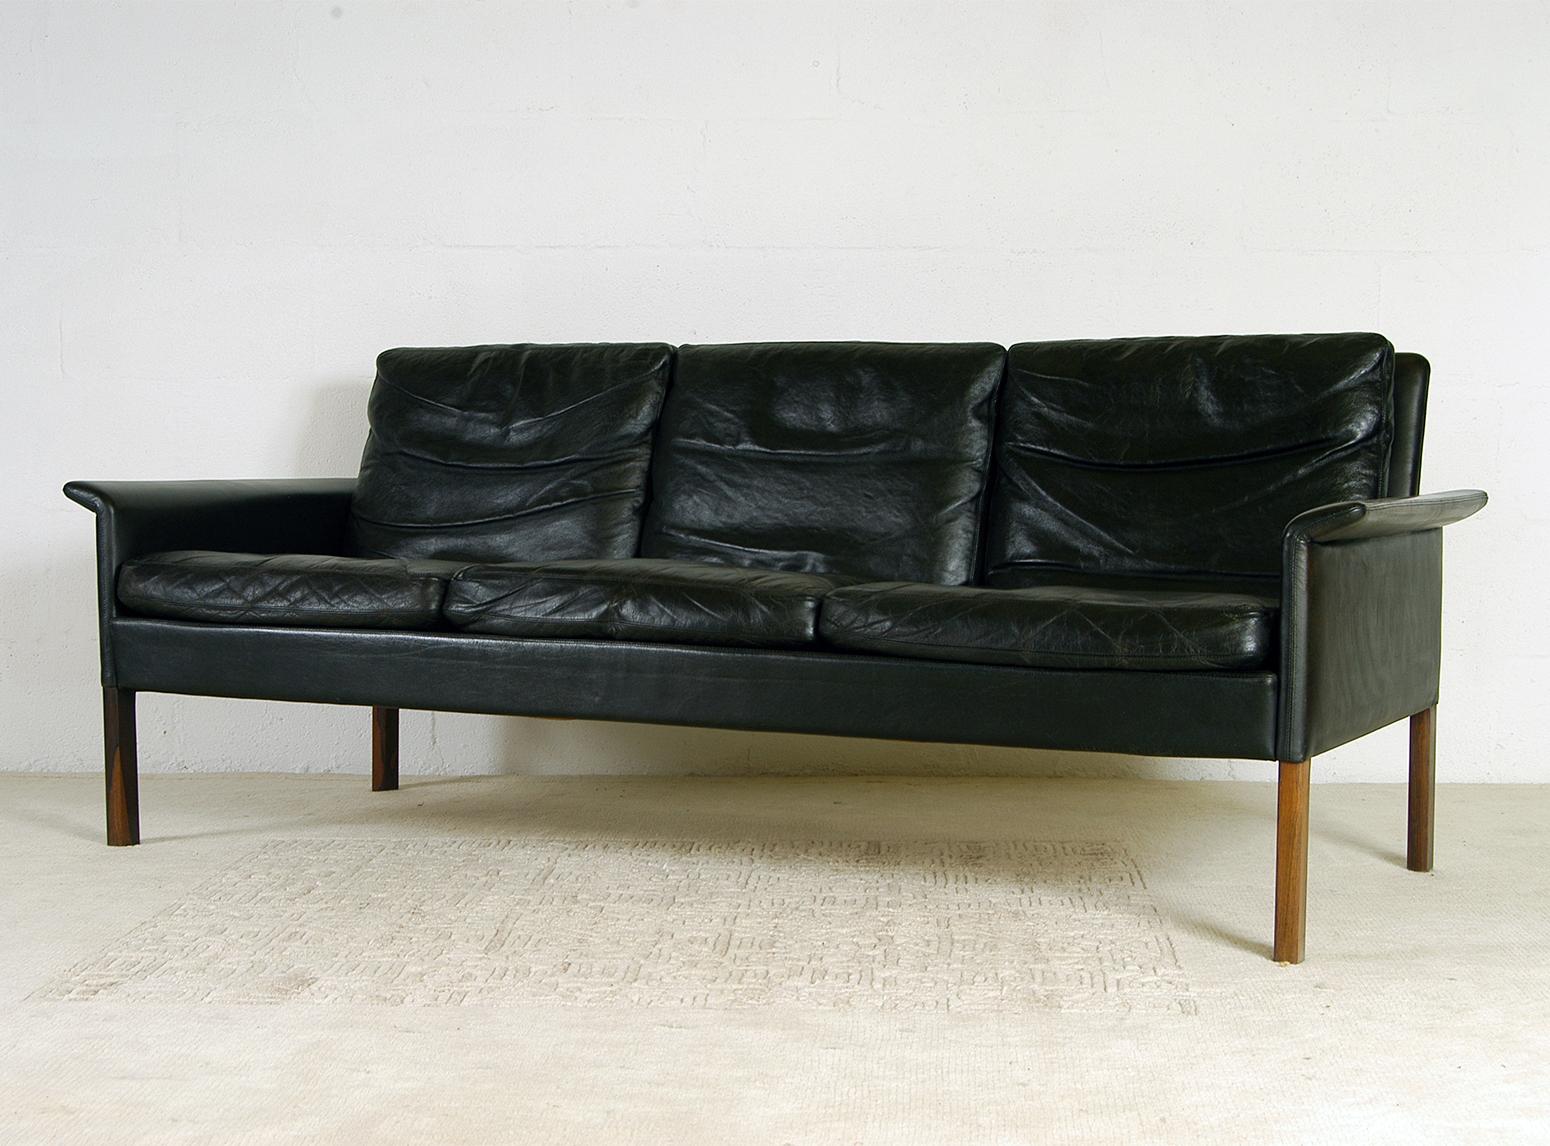 Superbly elegant three-seat sofa model CS500/3 designed by Hans Olsen in the 1960s for Christian Sorensen, Glostrup, Denmark. Covered with very nice original patina.
The sofa is in good original condition, retaining its original, supple, top-grain